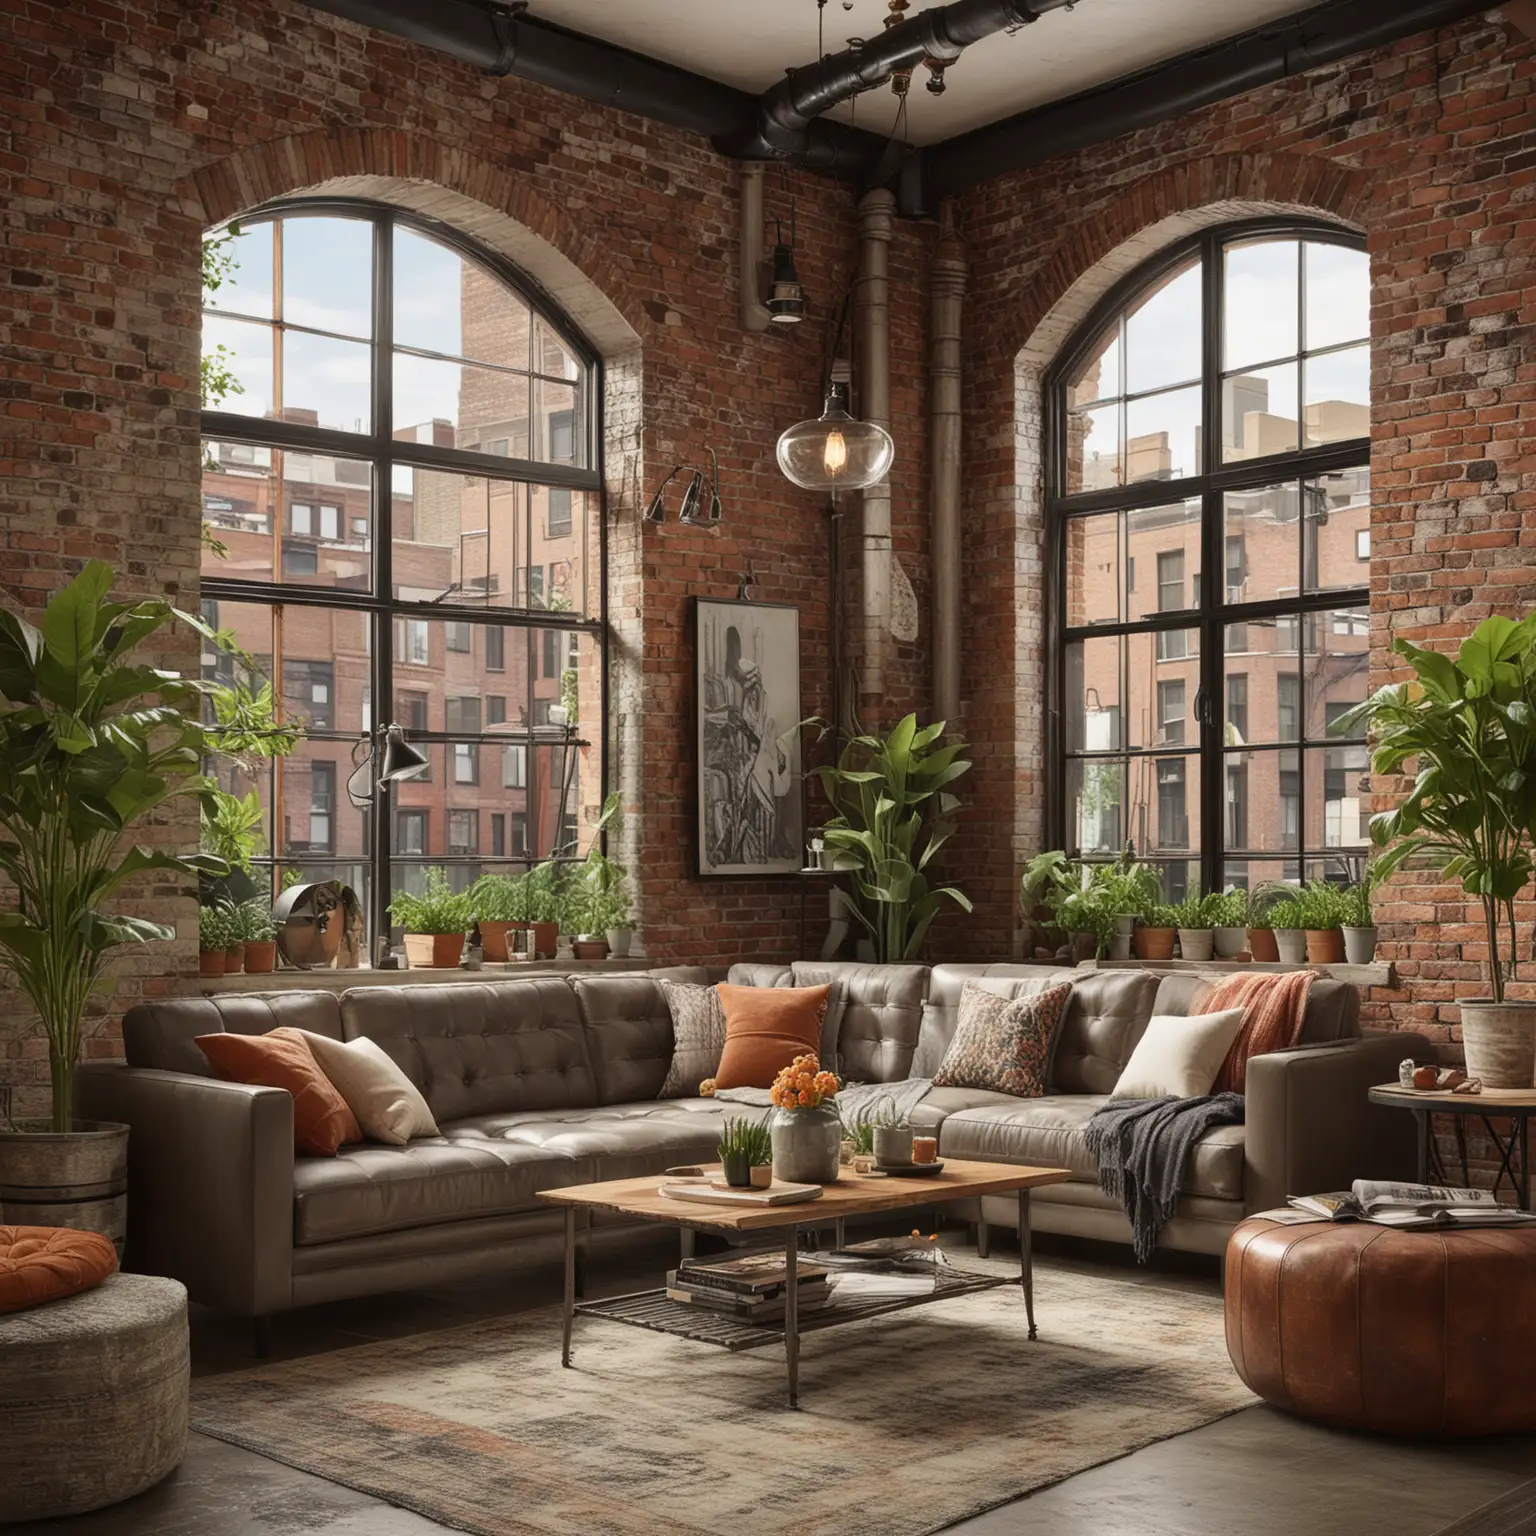 Urban Modern Vintage Living Room with Rooftop Garden Views: Create a spacious and contemporary urban living room with vintage elements like sleek furniture, exposed brick walls, and industrial-style lighting fixtures. Large windows should overlook a vibrant rooftop garden, adding a touch of nature to the urban setting. Decorate with vintage-inspired artwork and accessories for character.